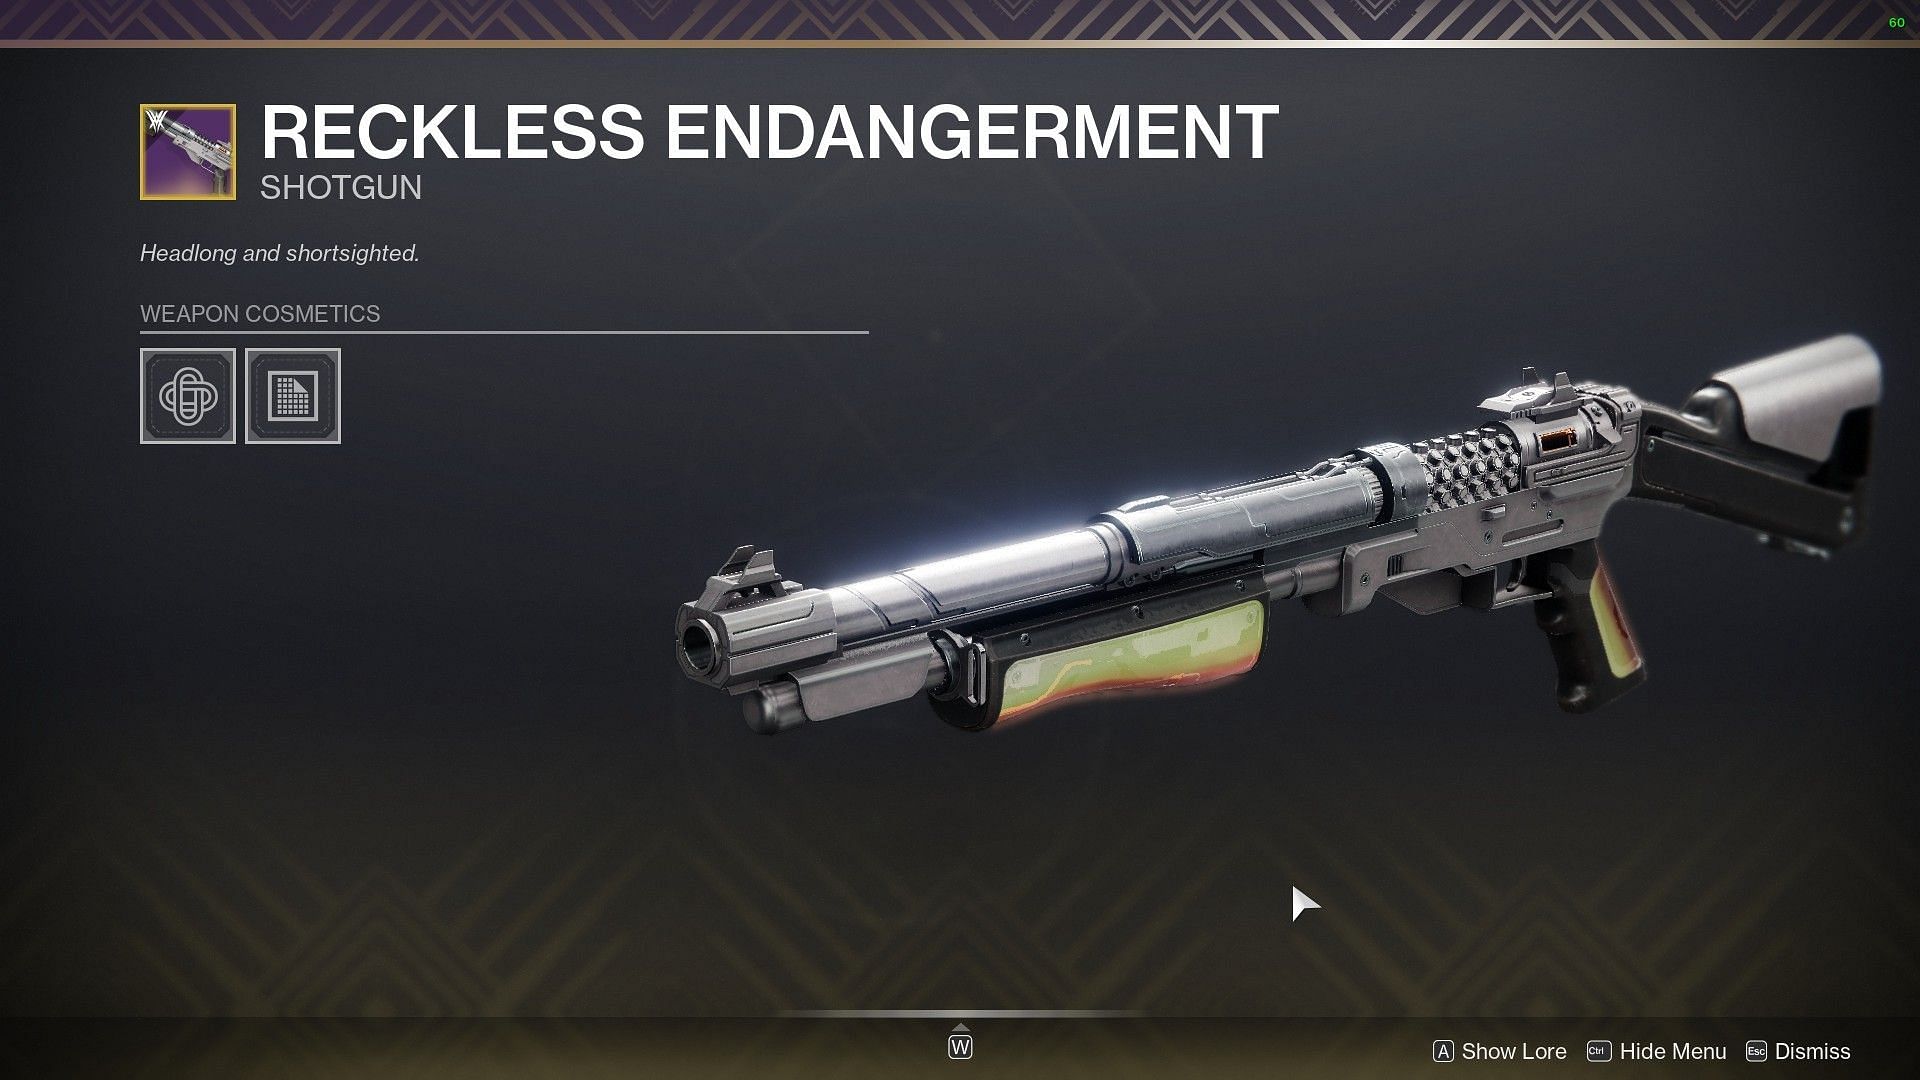 Reckless Endangerment can be obtained by reaching Rank 16 through the Crucible, Vanguard, or Gambit playlists (Image via Bungie)